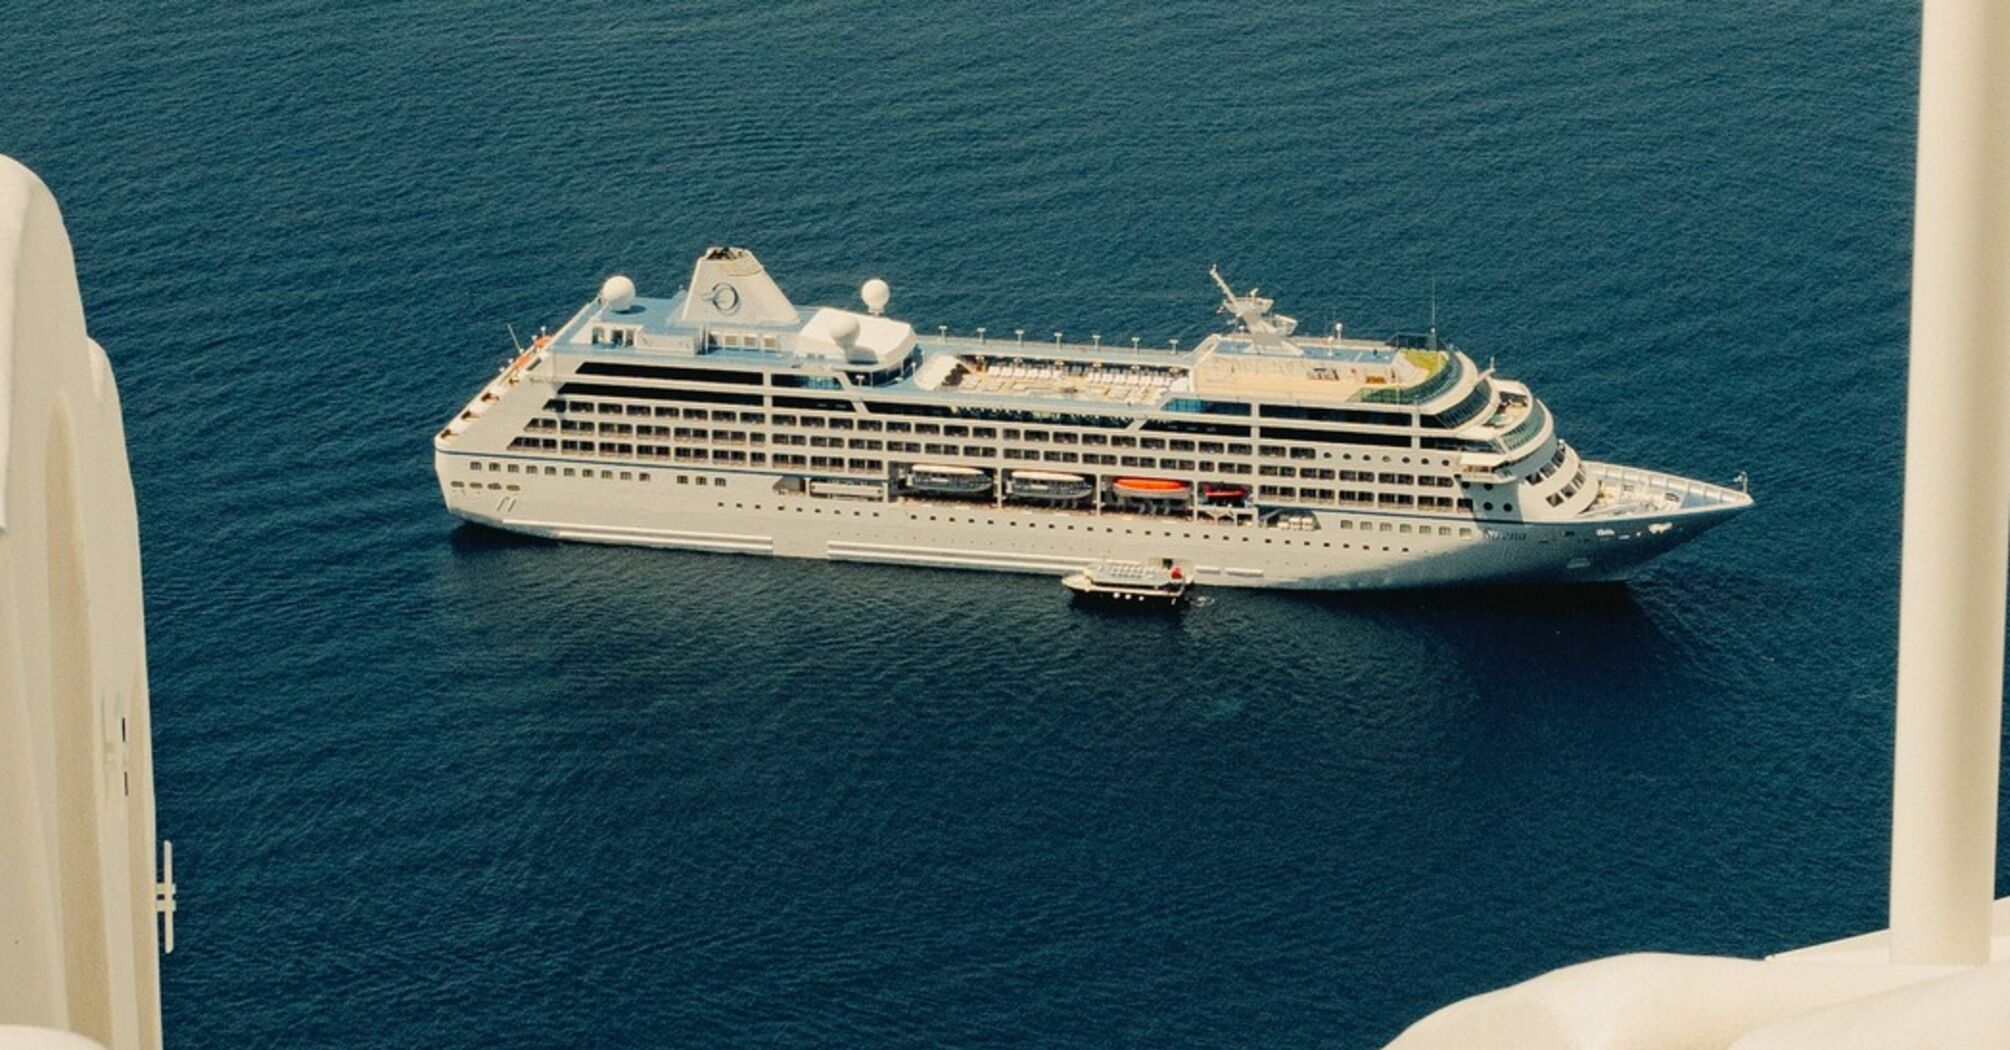 Tourists were given advice on what to bring on a cruise to avoid overpaying in onboard shops